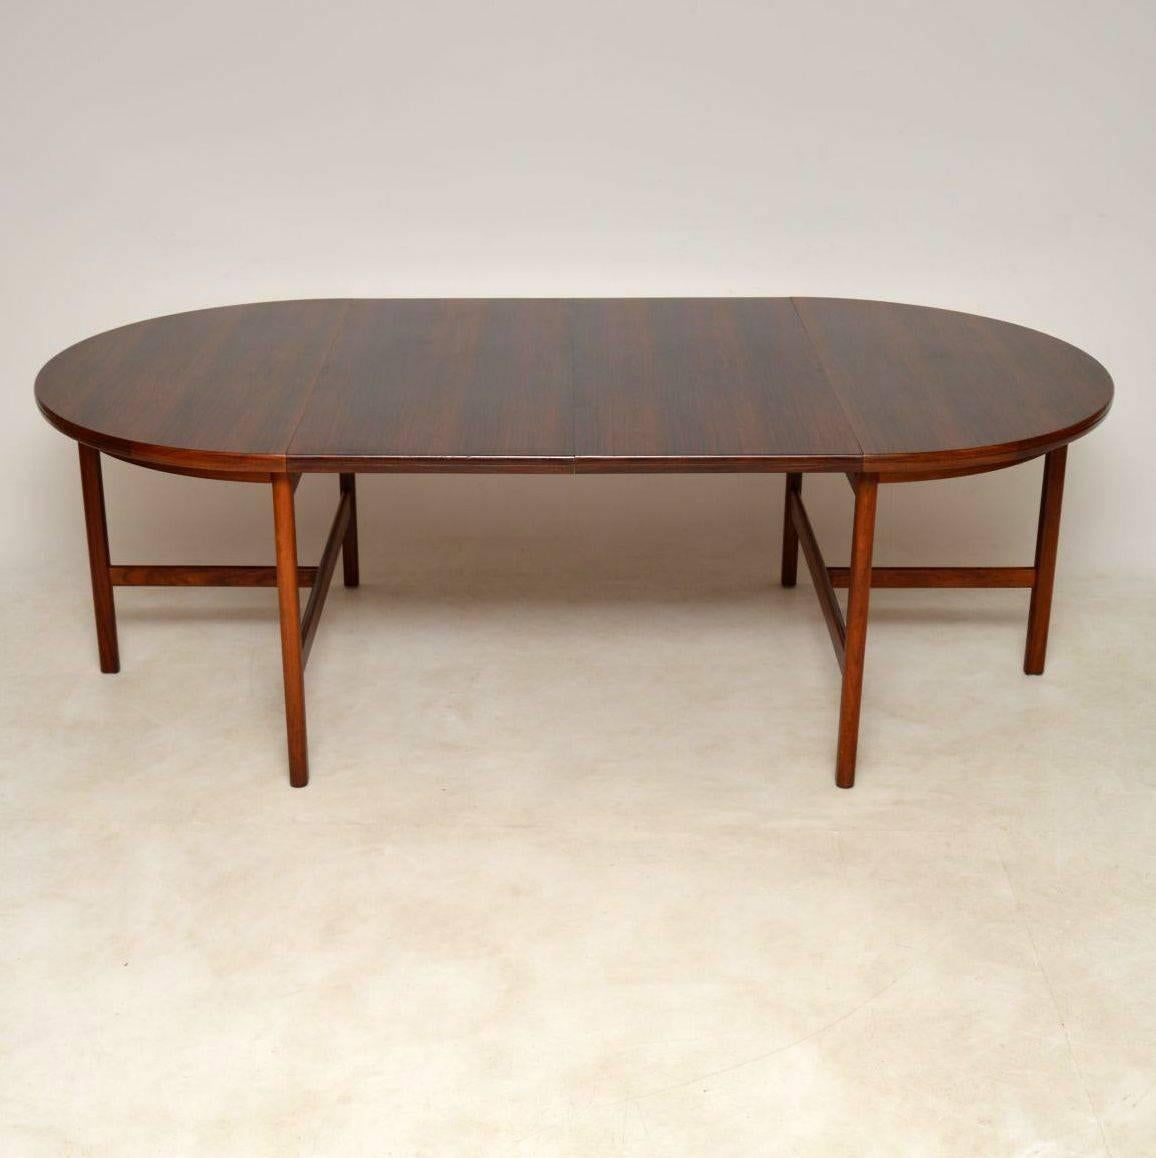 A stunning vintage dining table designed by Robert Heritage and made by Archie shine in the 1960s. This is in great original condition, with only some extremely minor wear here and there, there are a couple of very minor old marks on the top that